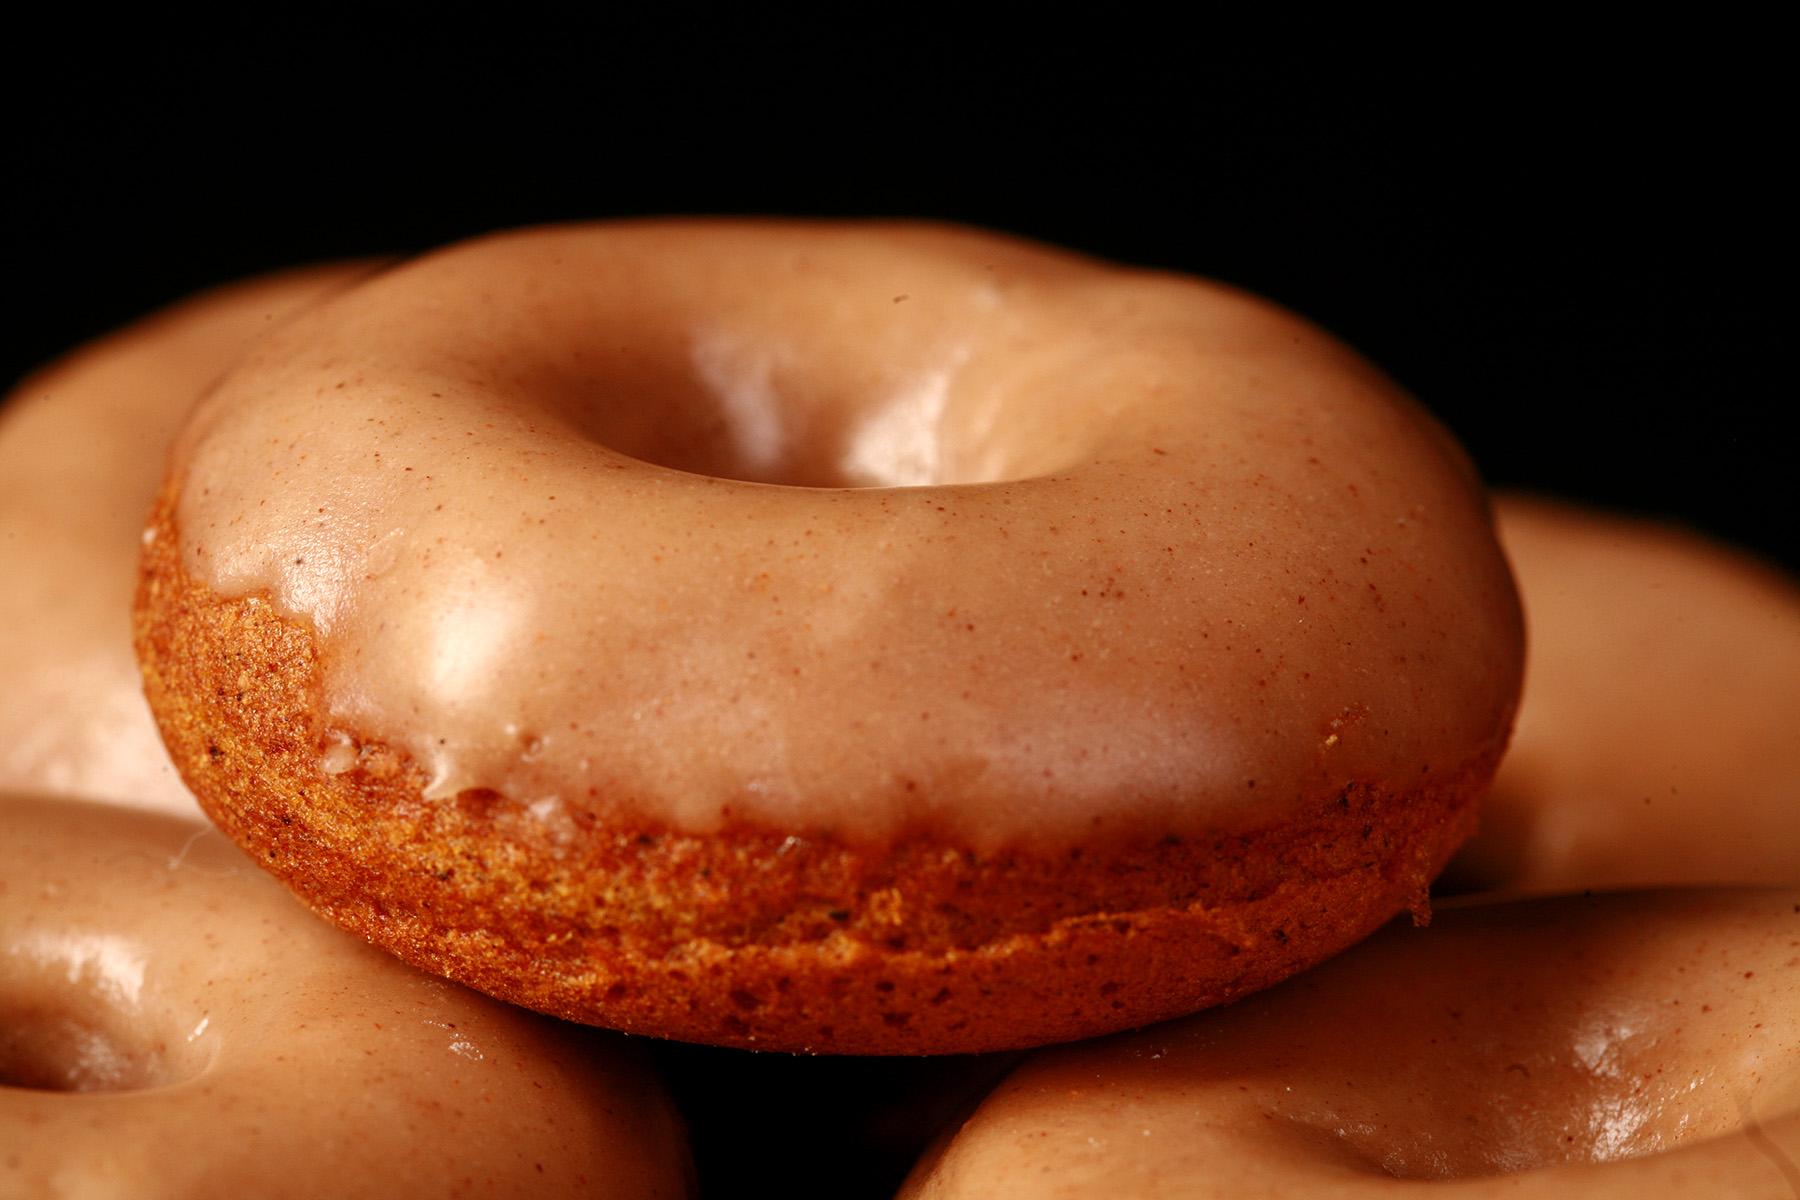 Close up view of gluten-free pumpkin spice mini doughnuts. They are glazed with a tan coloured frosting.